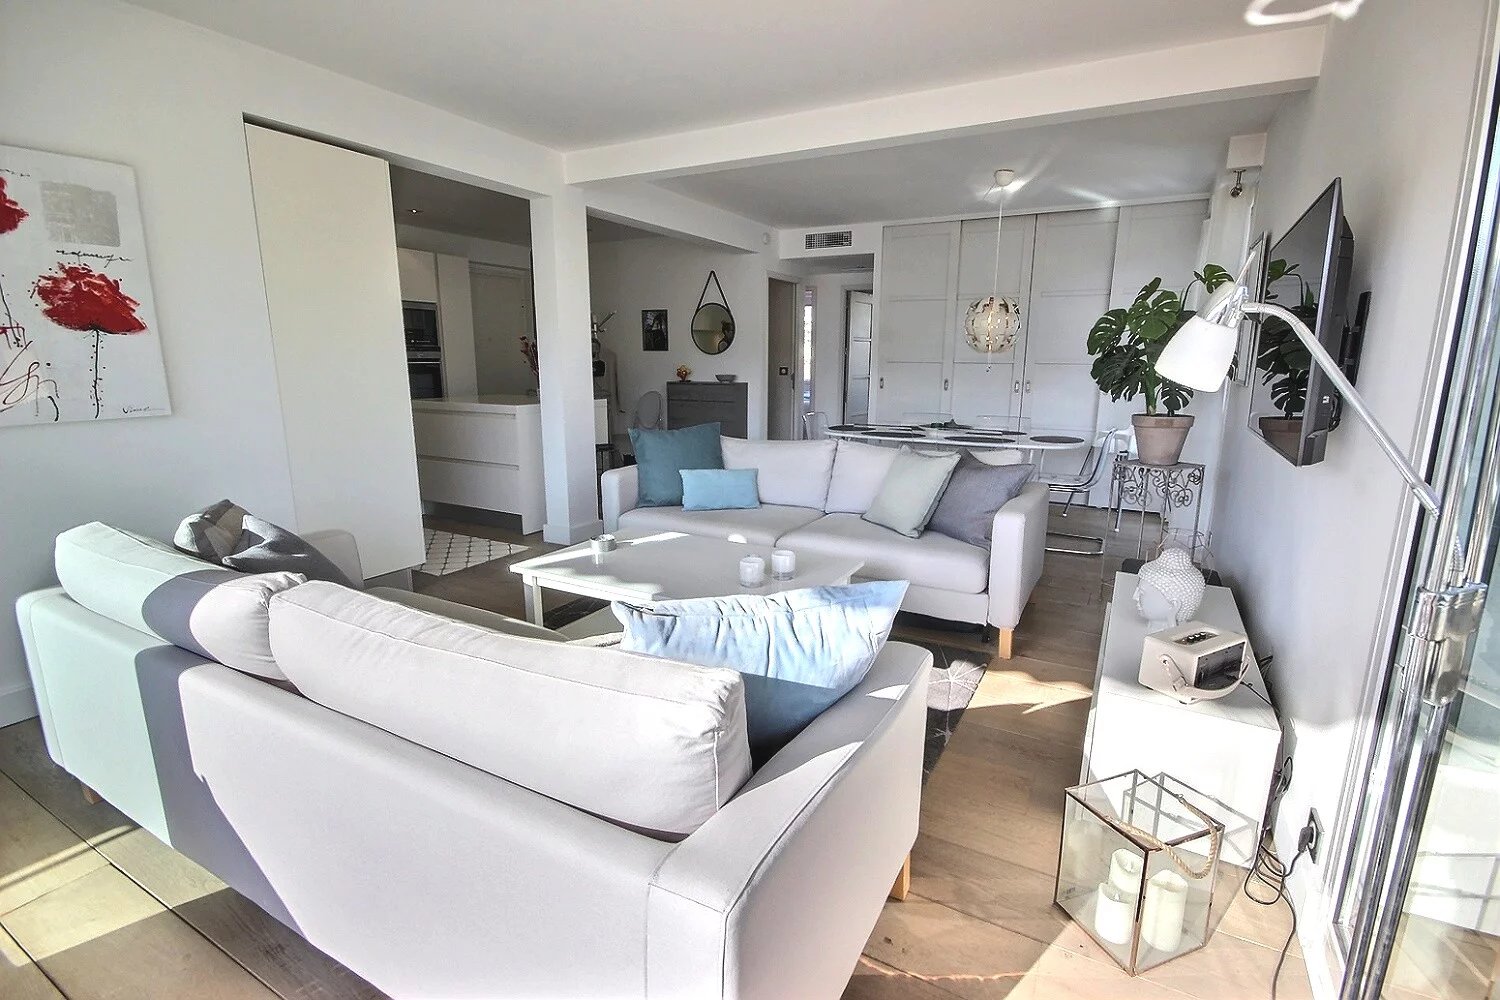 Stunning 3-Room Apartment for Sale in Cannes - Basse Californie